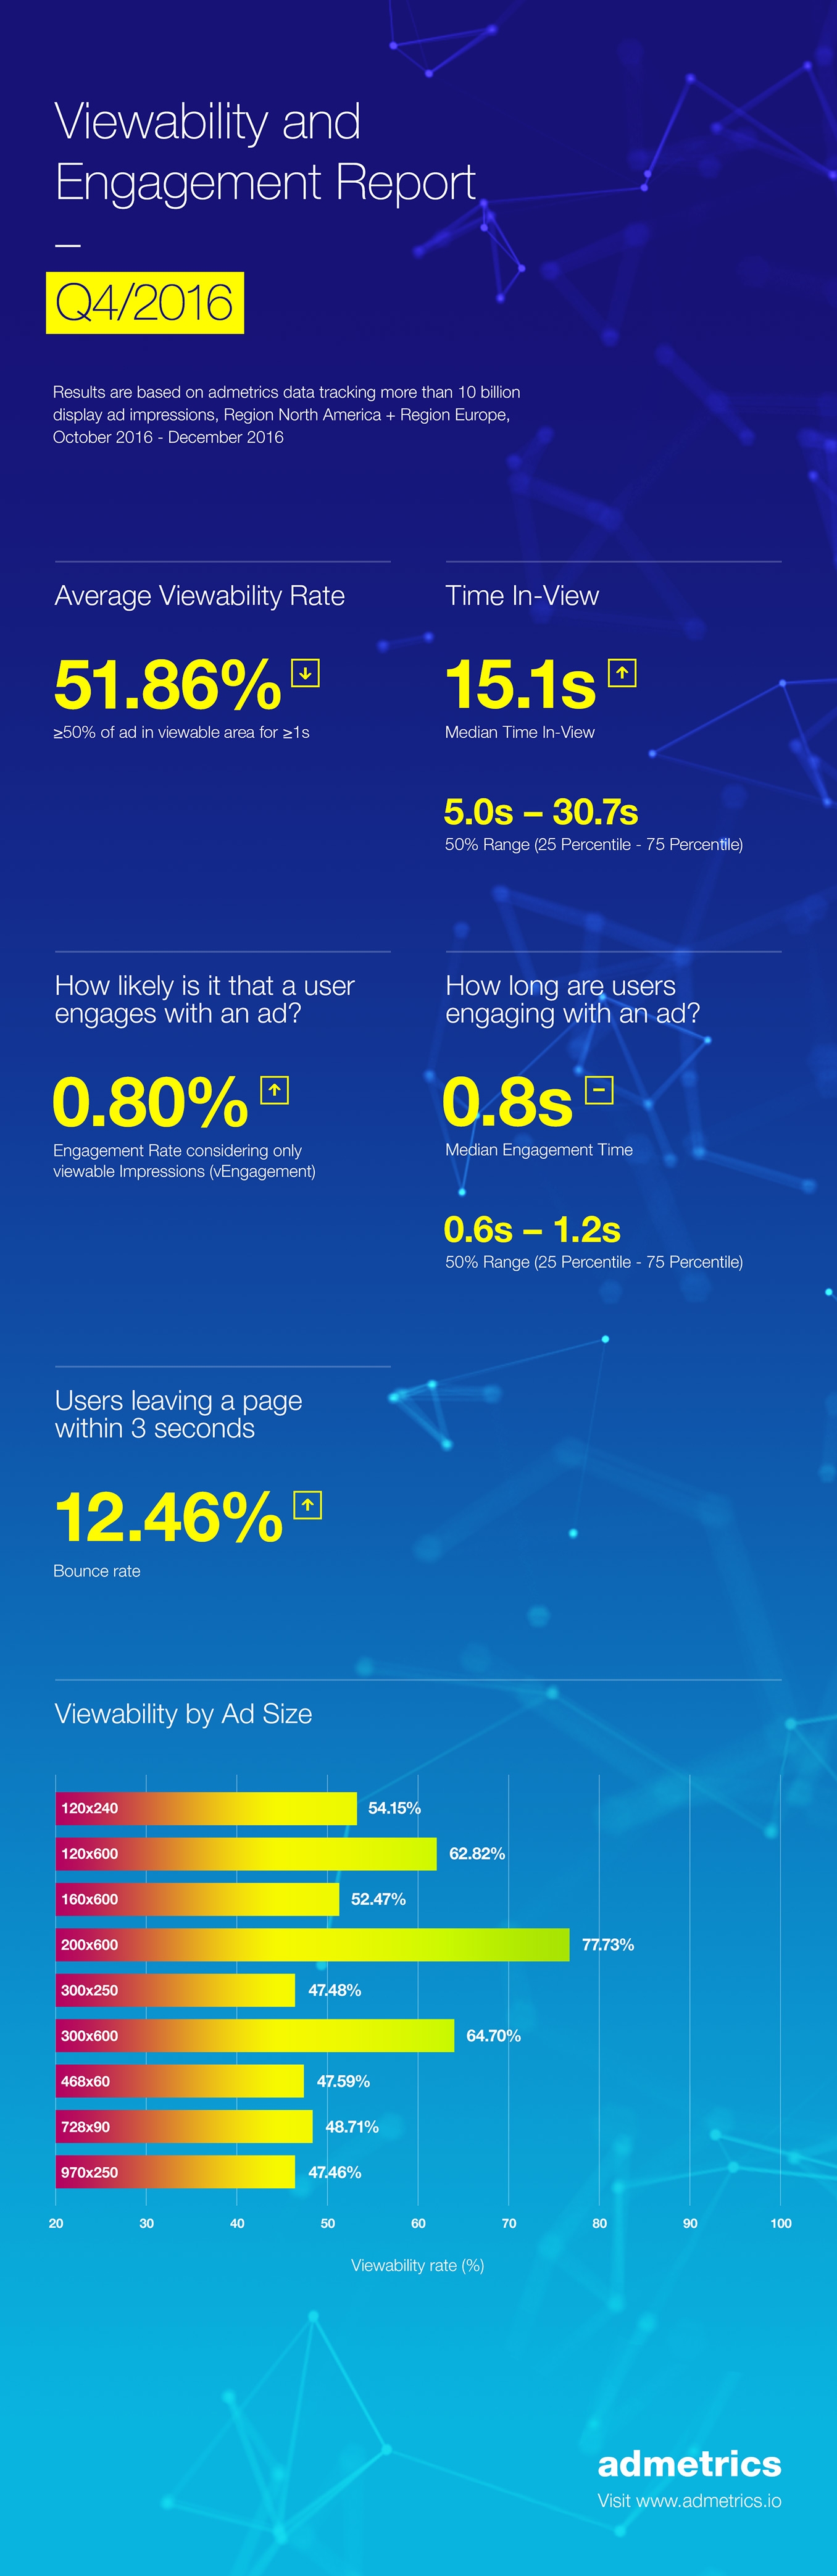 Infographic: Q4 2016 Viewability and Engagement Stats